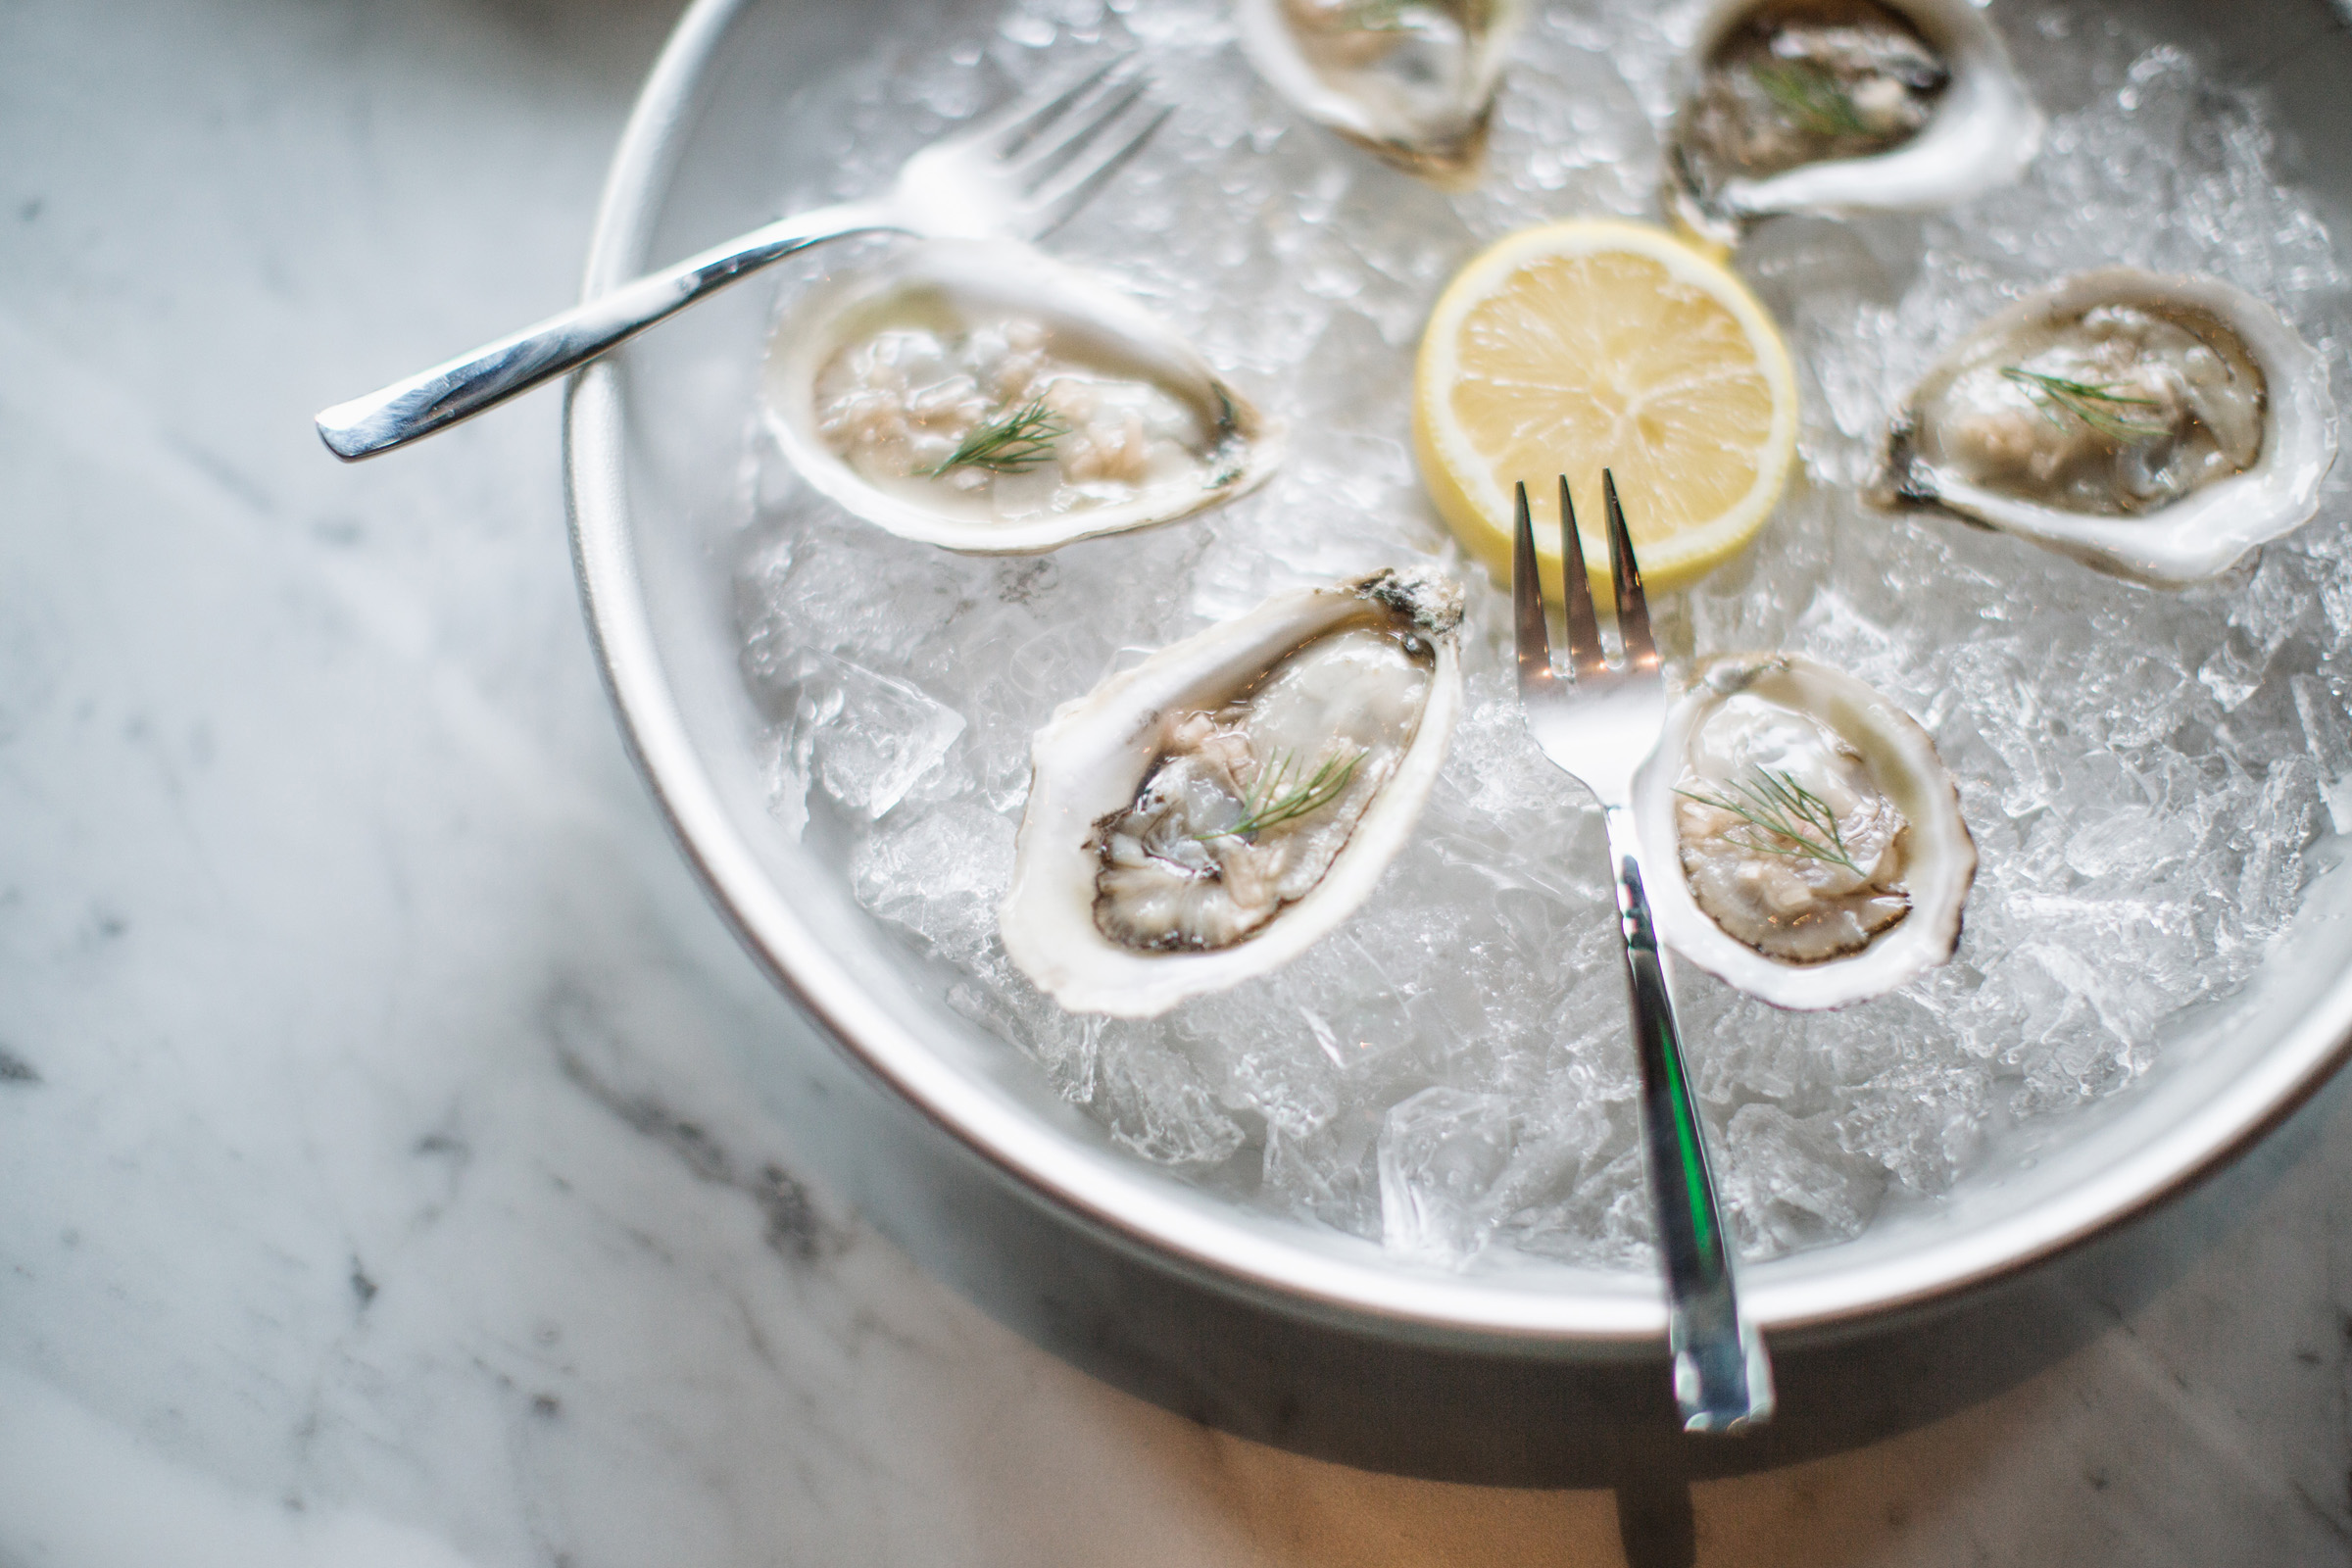 Oysters over ice at Le Cavalier